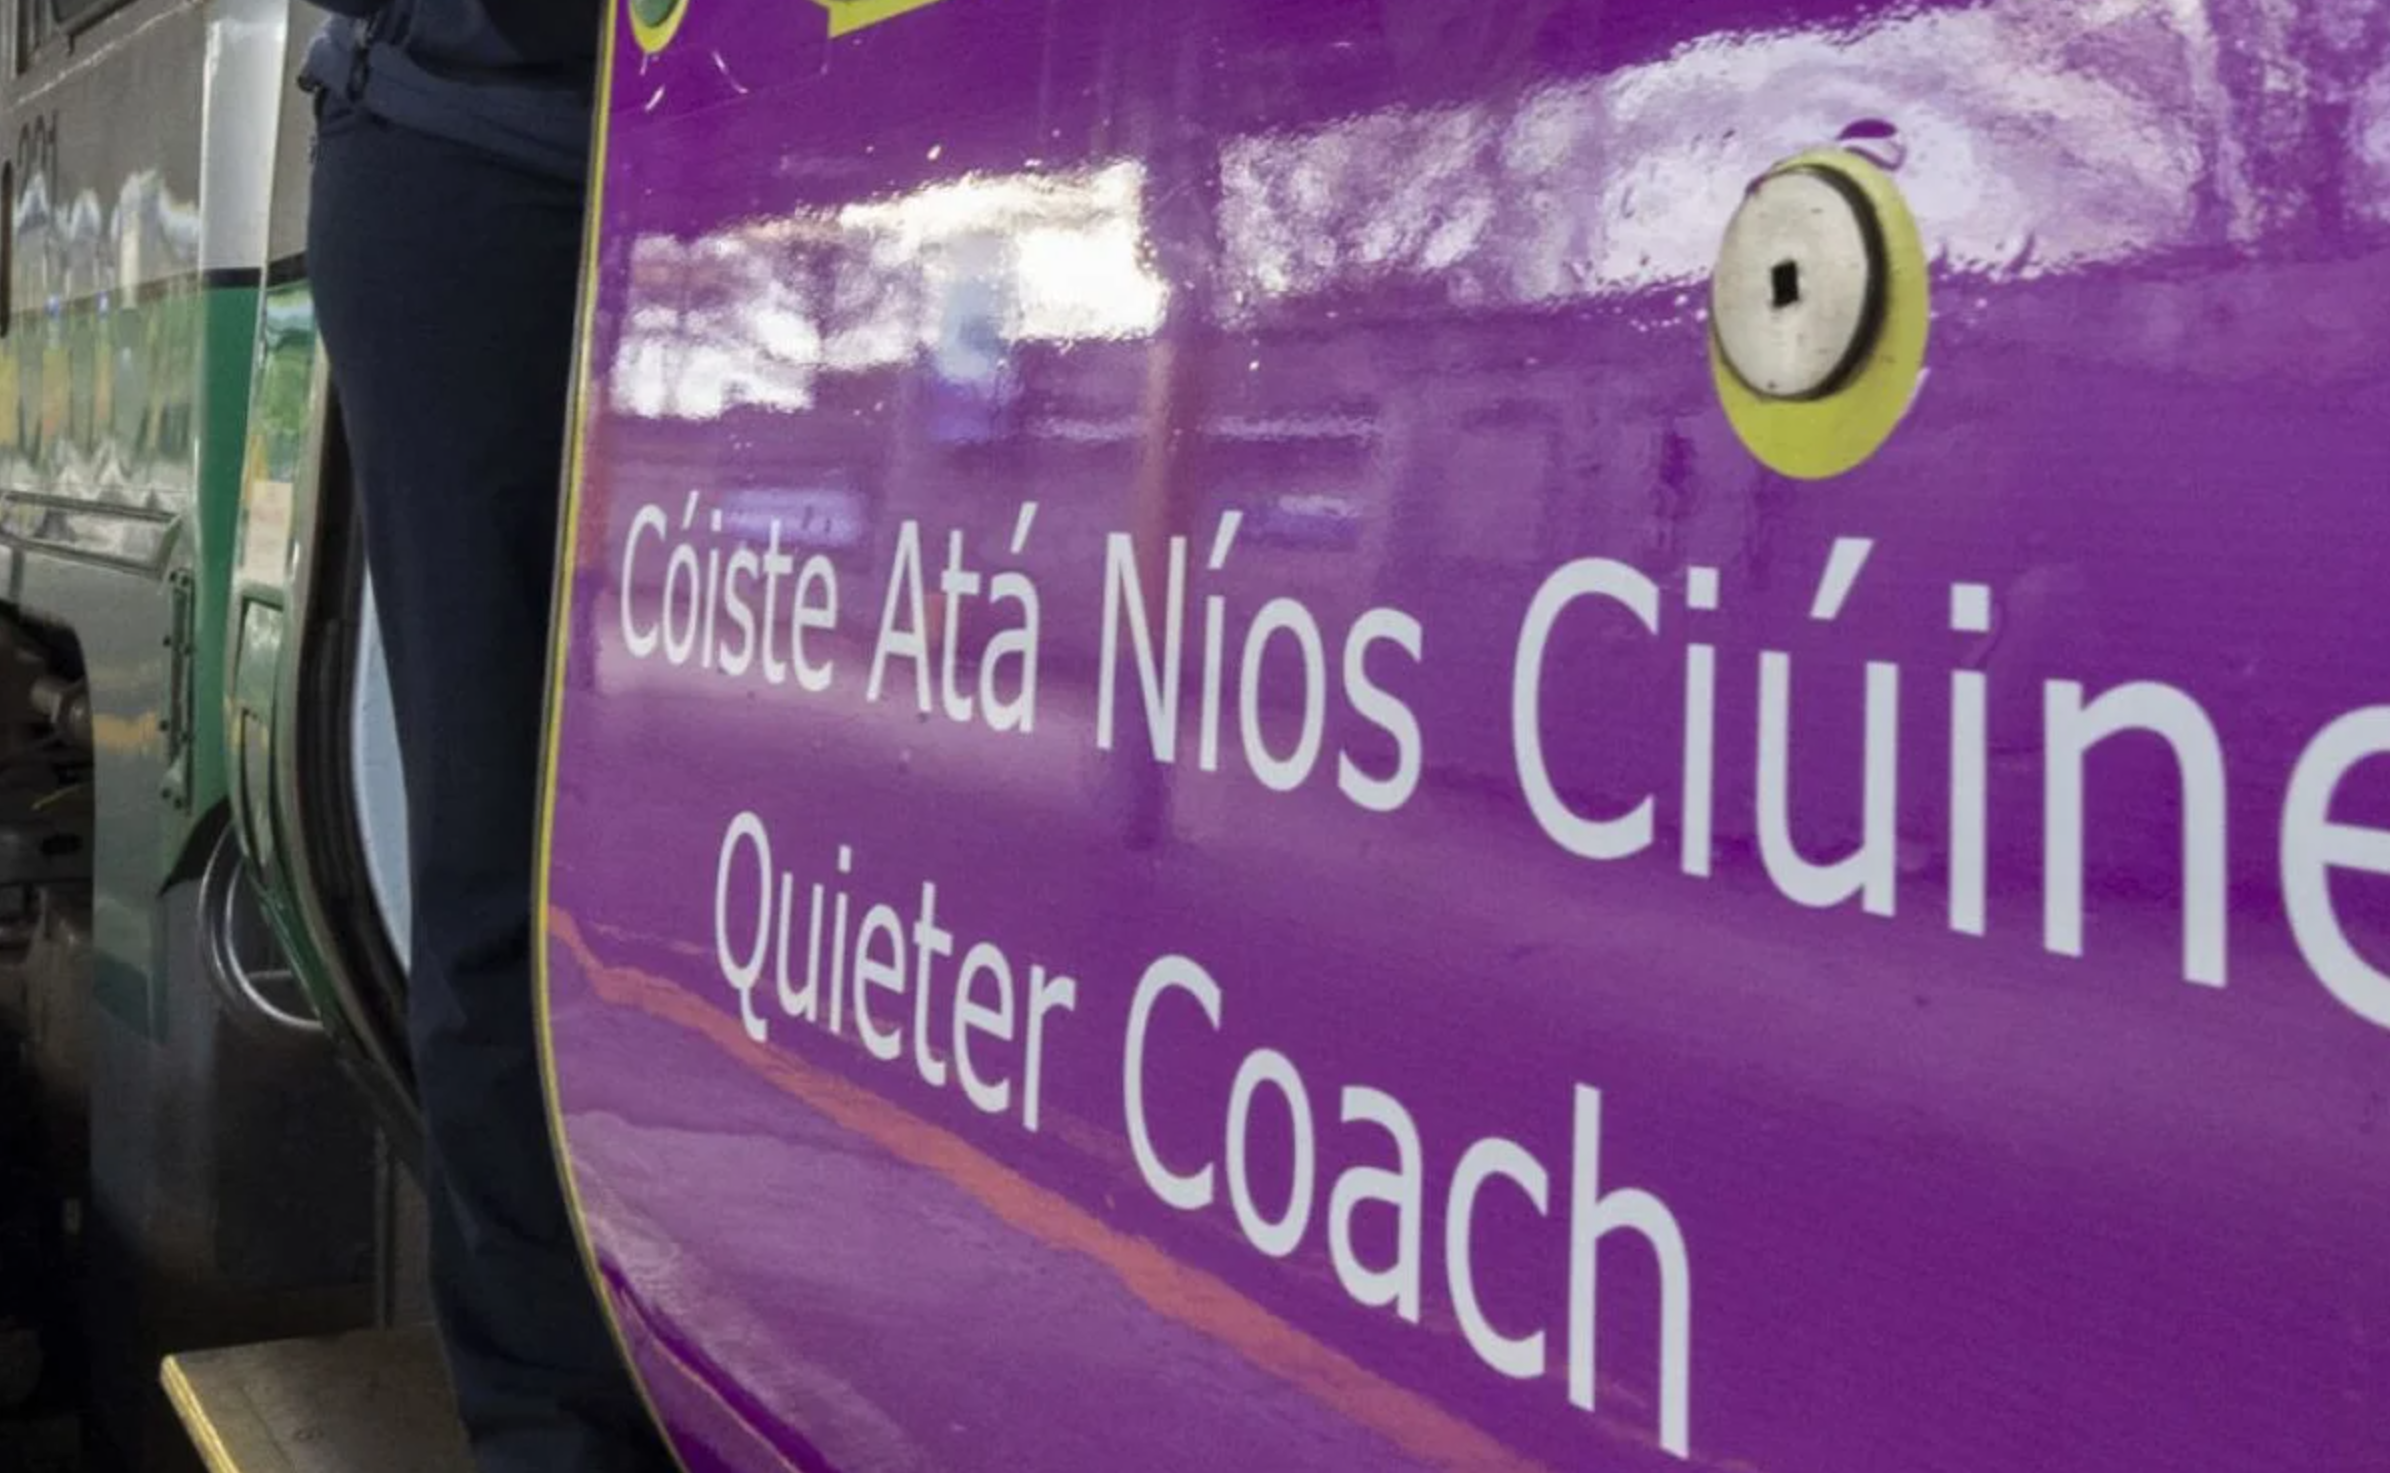 Door of Quiter Coach G on Irish Rail Train with sign that says Quiter Coach